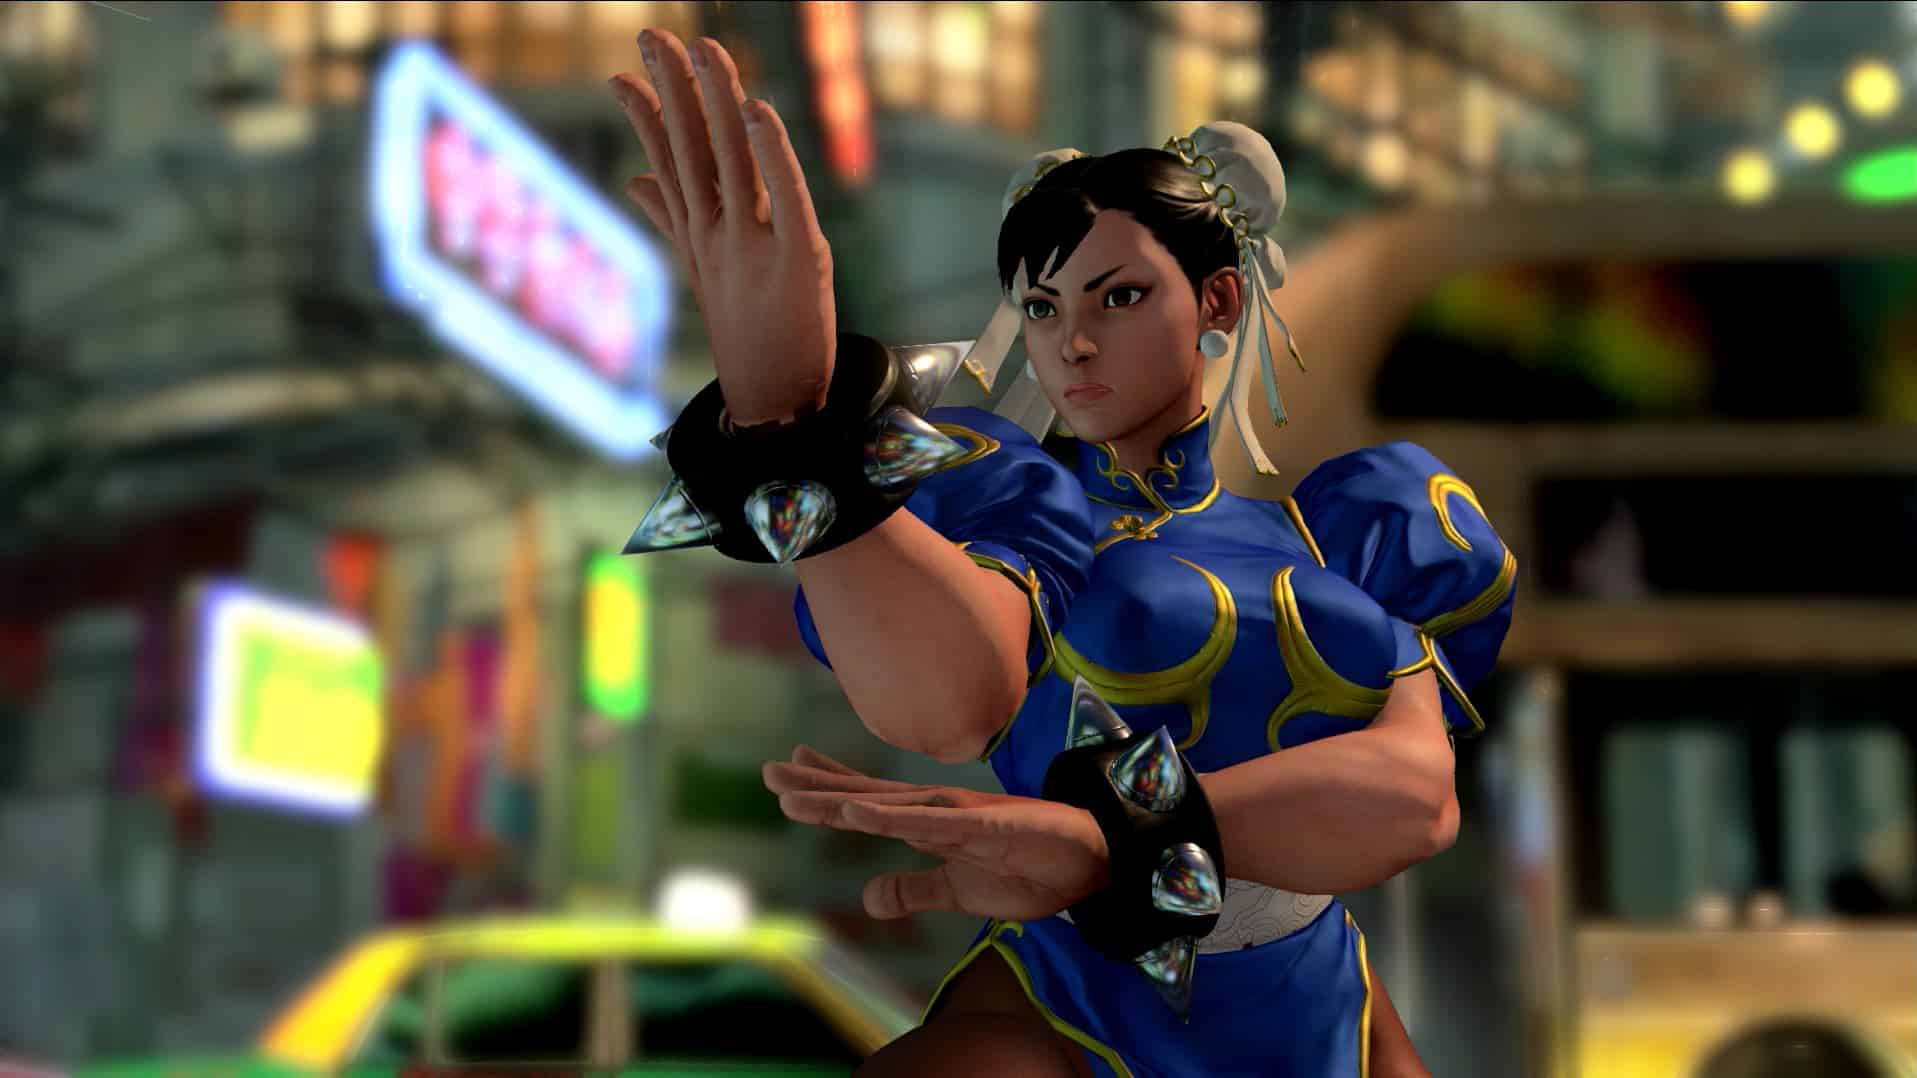 street fighter 6 ps4